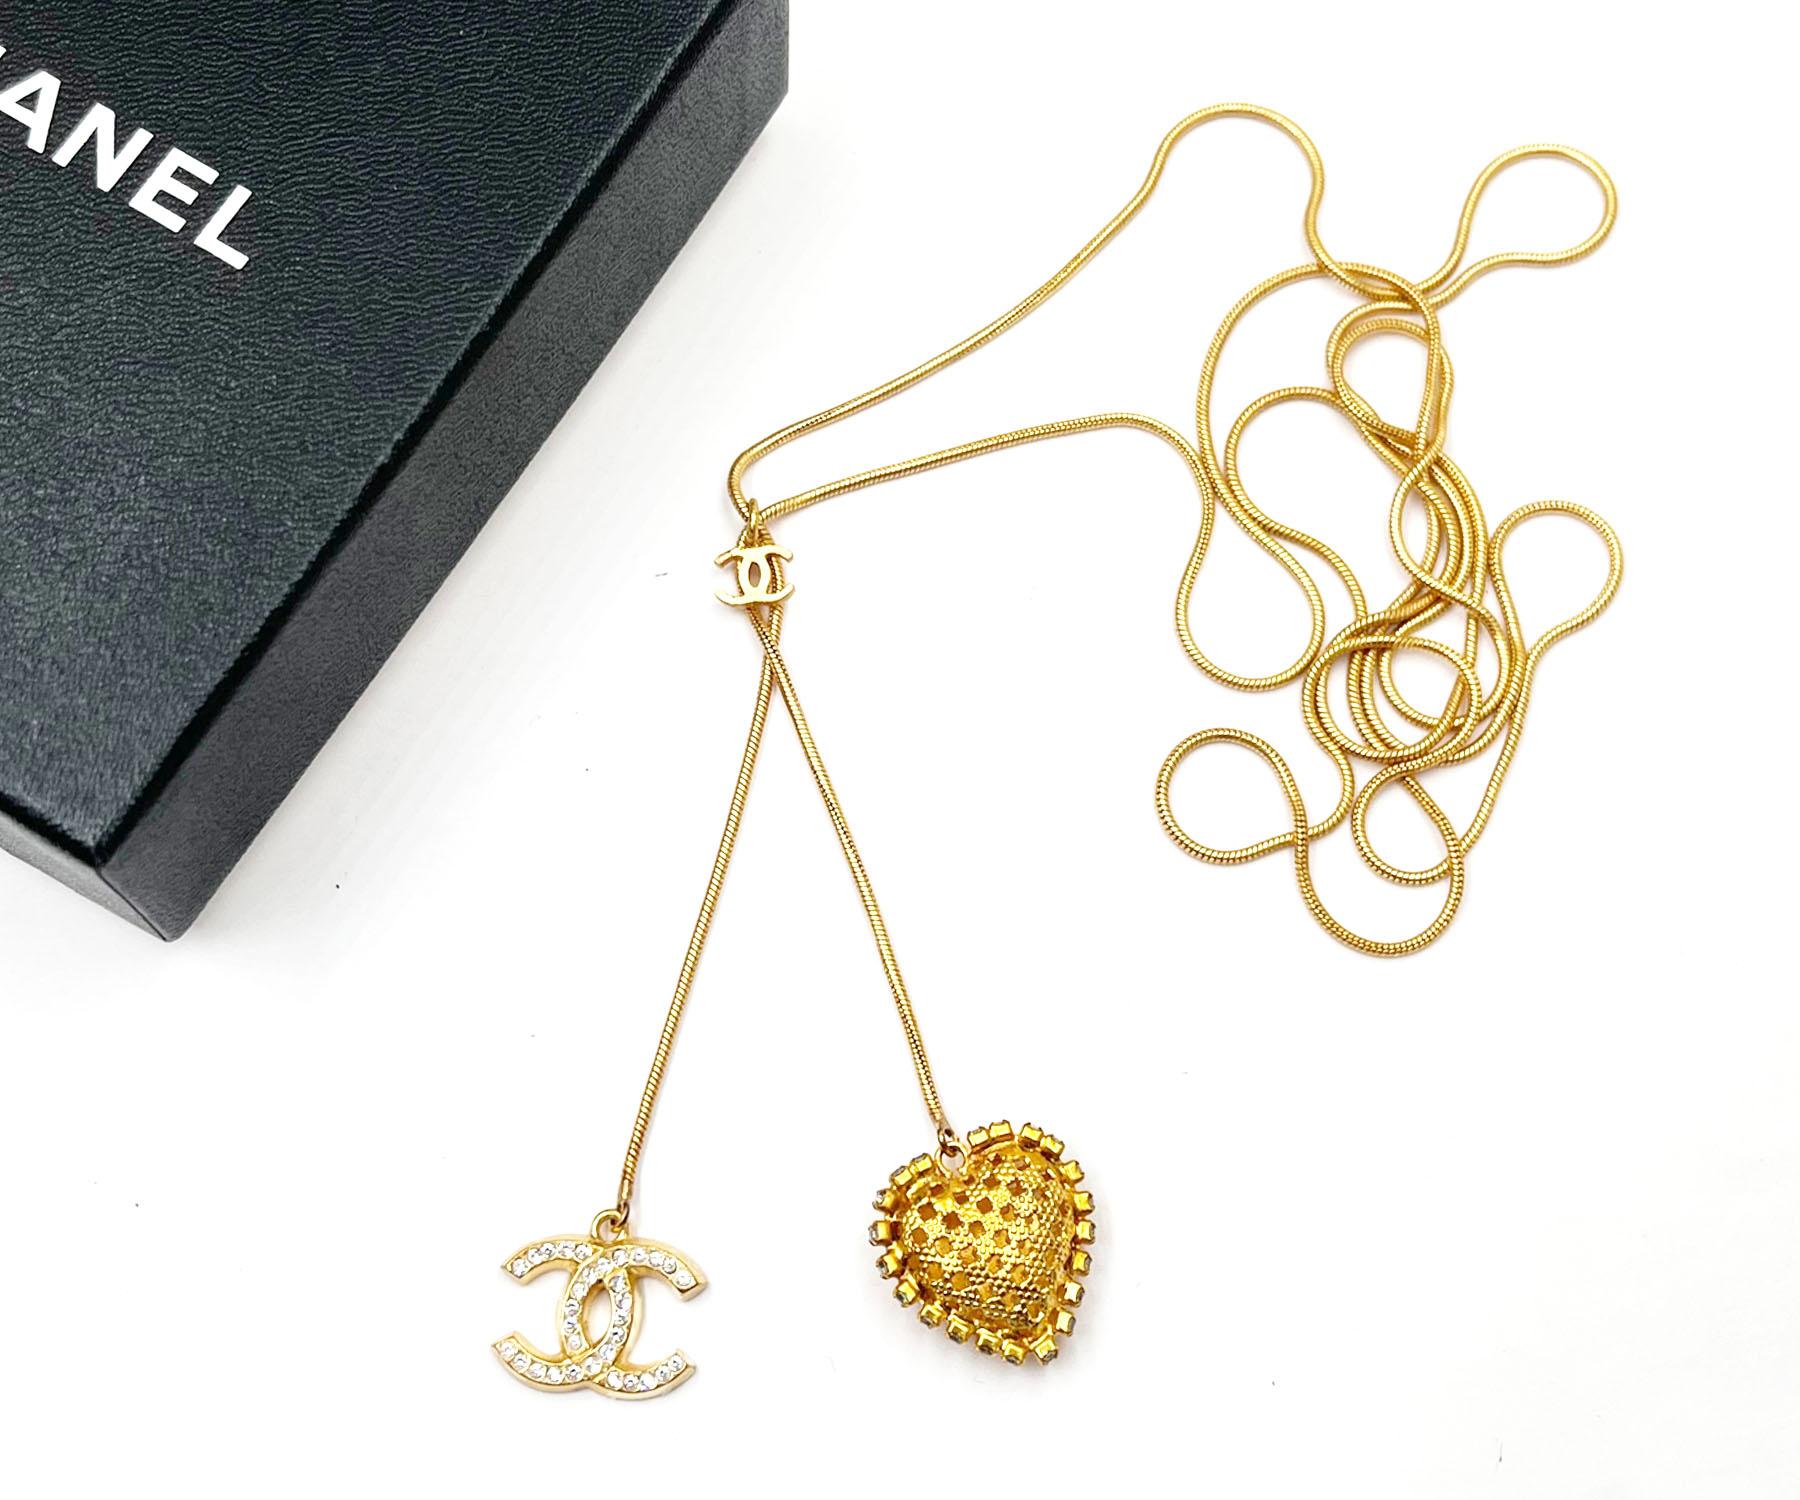 Chanel Vintage Gold Plated CC Crystal Heart Lariat Long Necklace

*Marked 01
*Made in France
*Comes with original box

-The total length is approximately 42